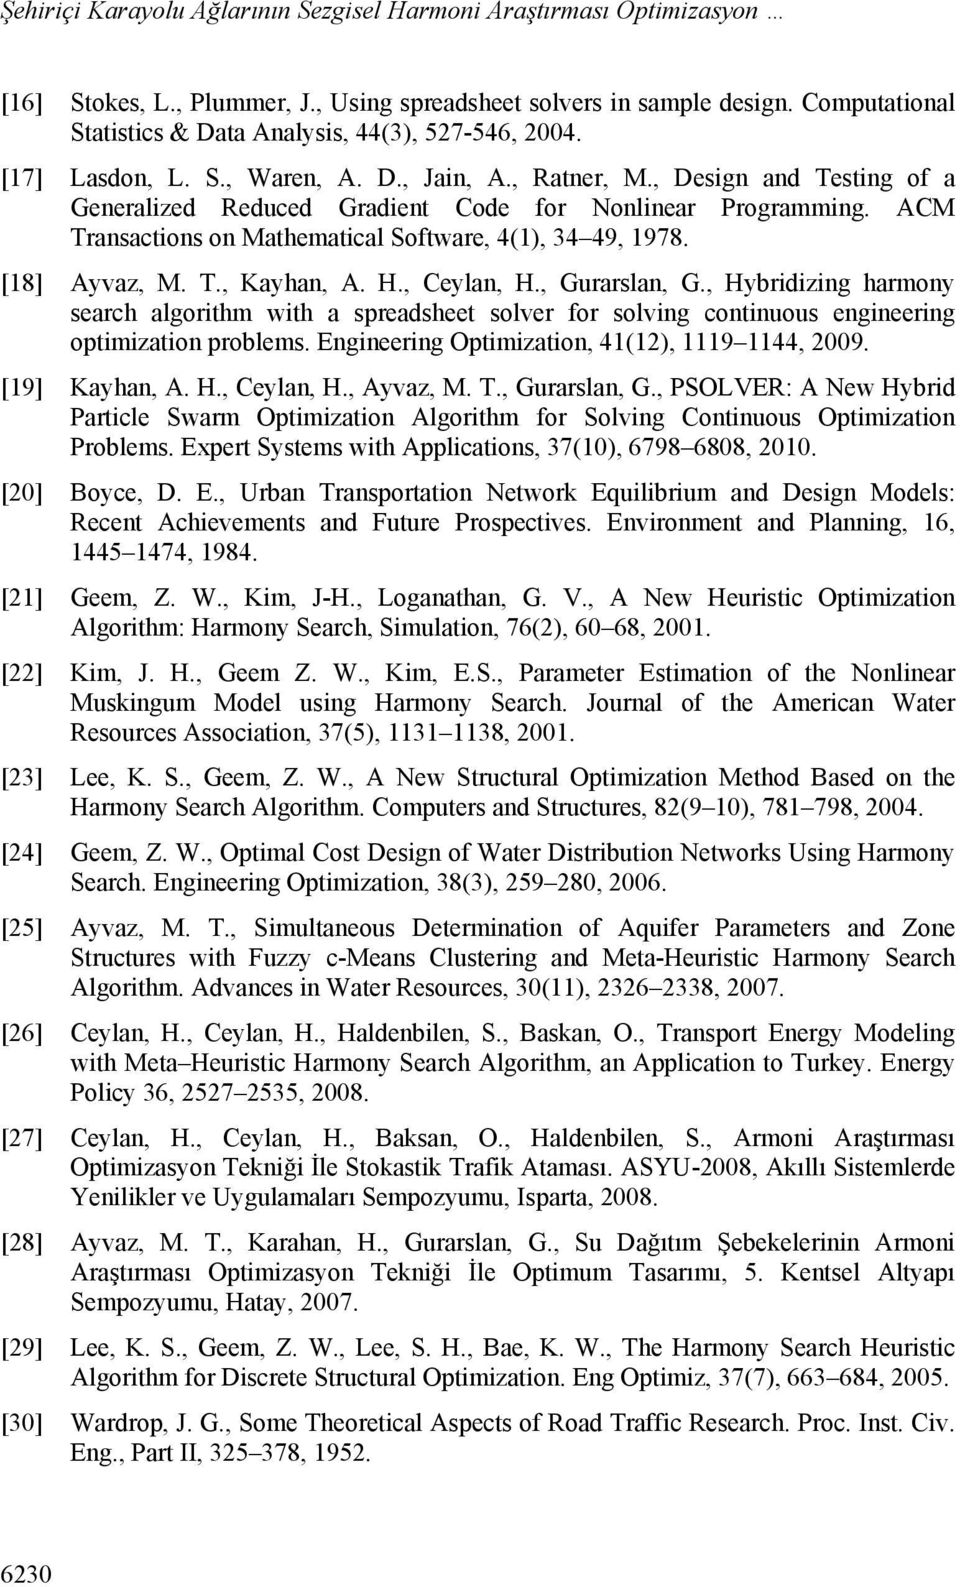 [18] Ayvaz, M. T., Kayhan, A. H., Ceylan, H., Gurarslan, G., Hybrdzng harmony search algorthm wth a spreadsheet solver for solvng contnuous engneerng optmzaton problems.